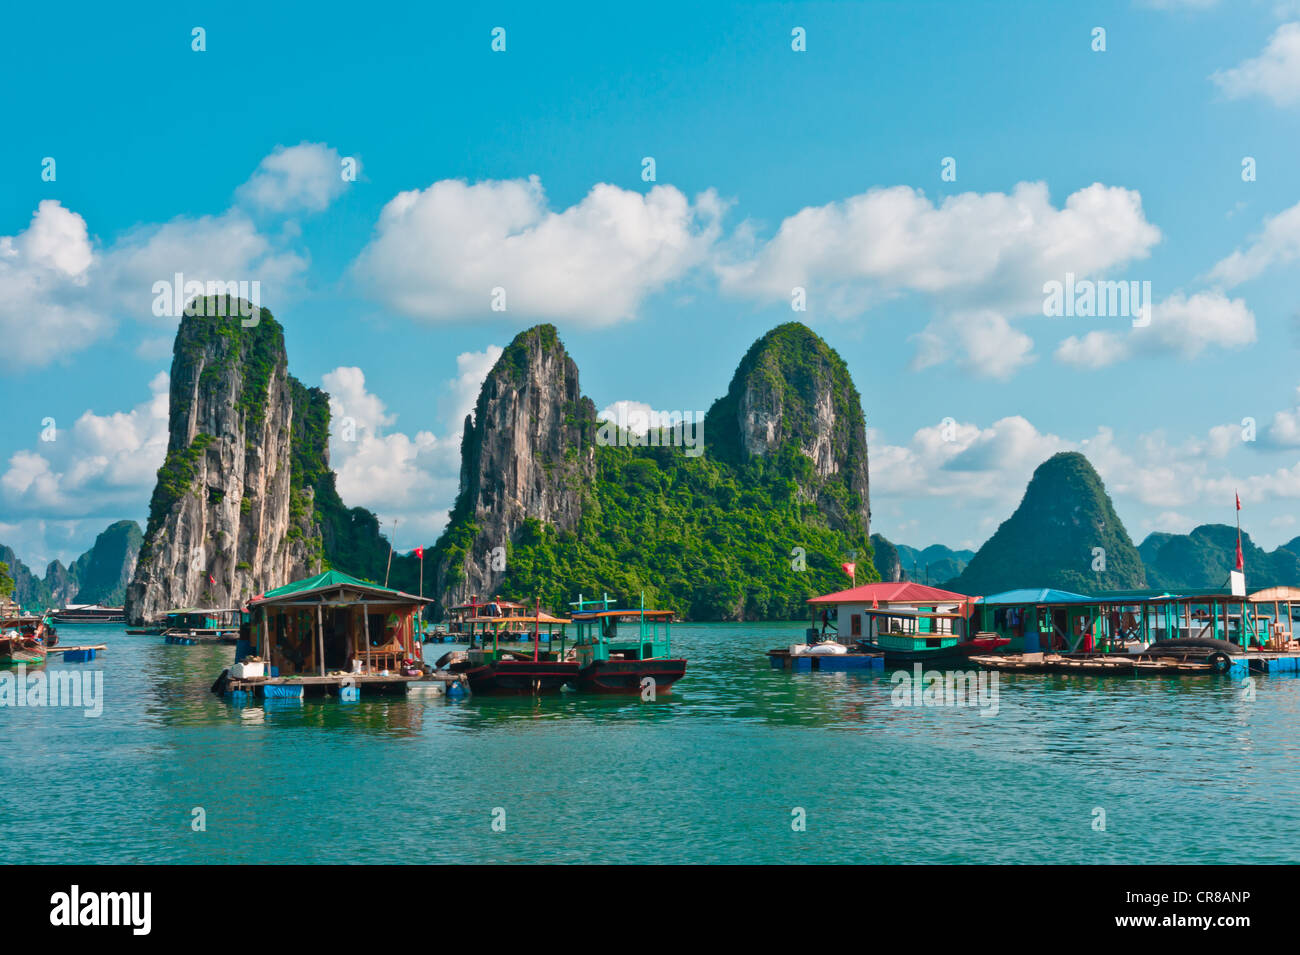 View of Floating Fishing Village in Halong Bay, Vietnam, Southeast Asia Stock Photo